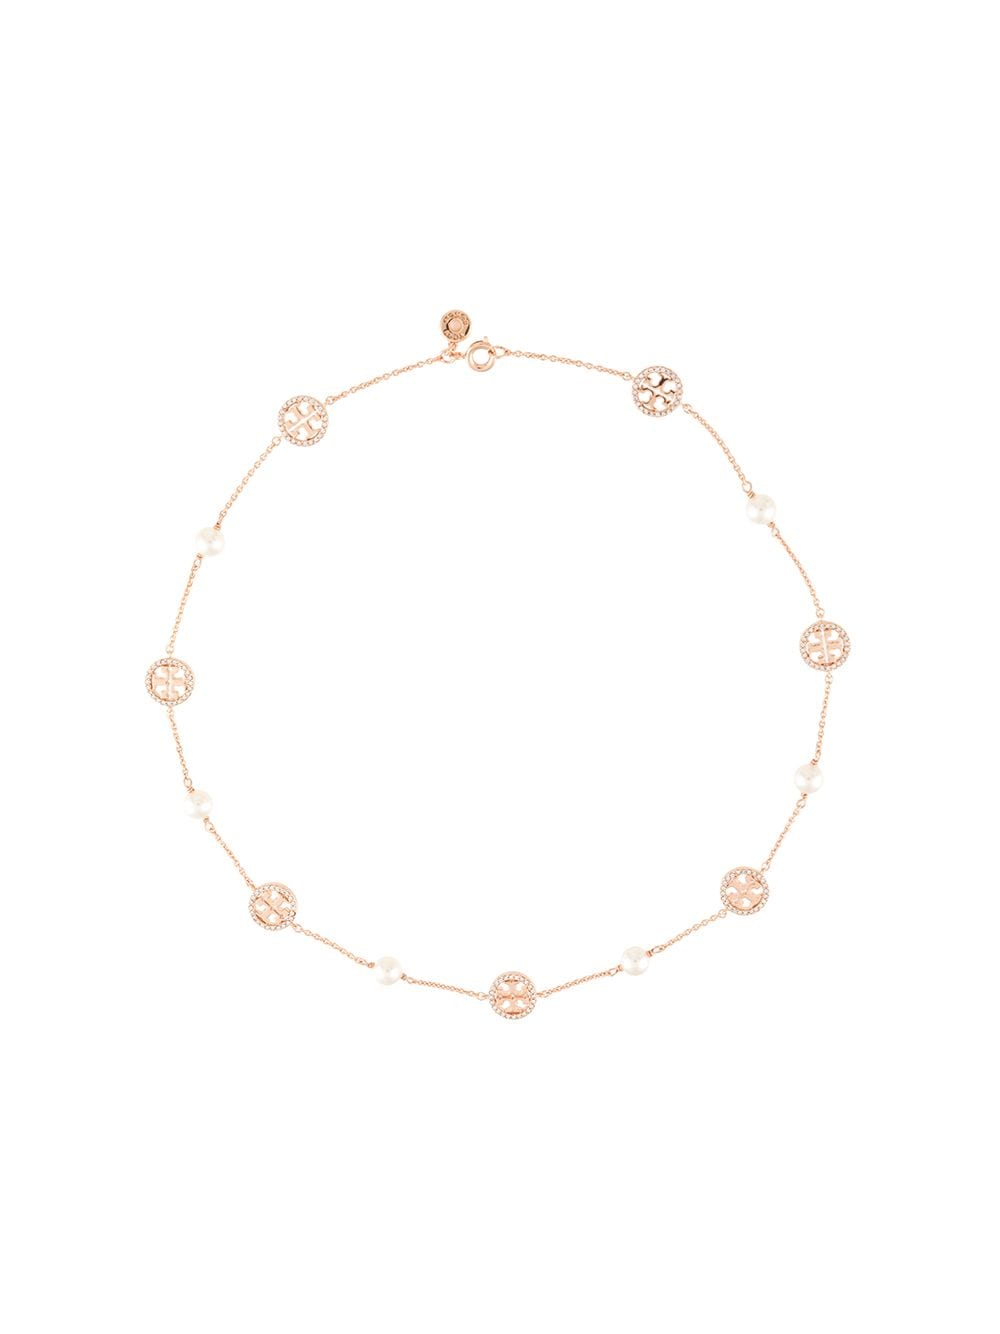 Shop Tory Burch crystal pearl logo necklace with Express Delivery - FARFETCH